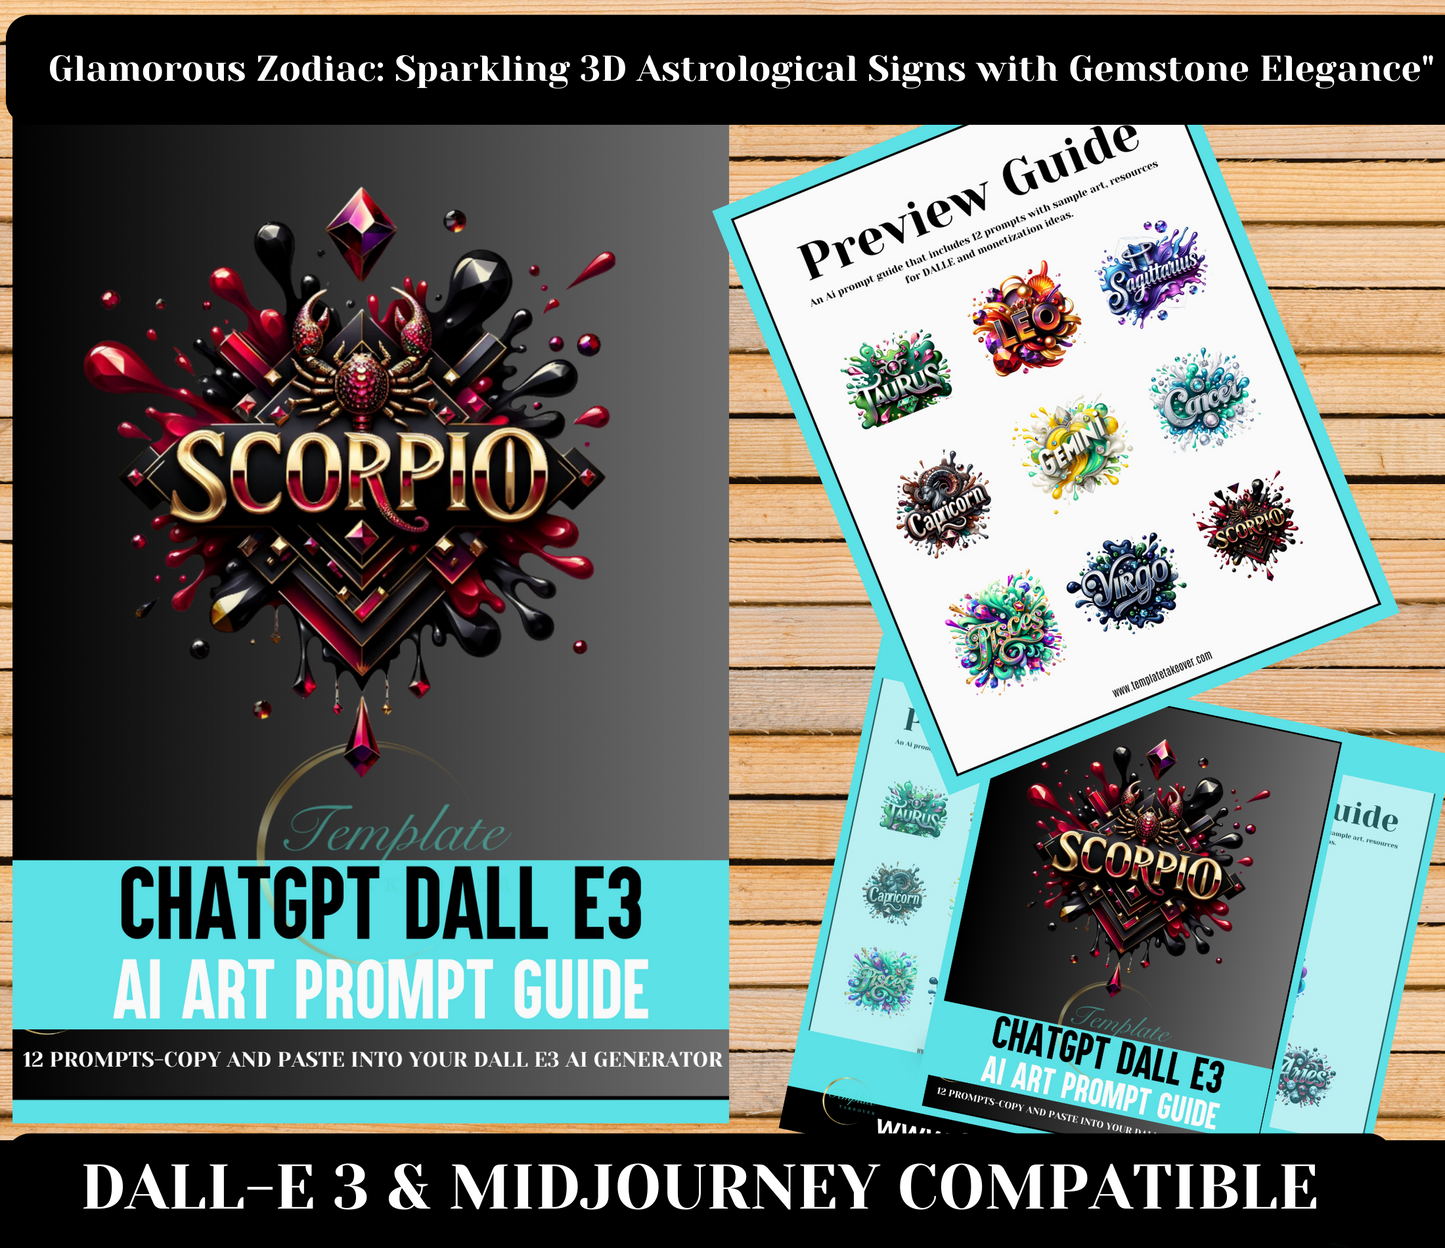 "Glamorous Zodiac: Sparkling 3D Astrological Signs with Gemstone Elegance" Prompt Guide!